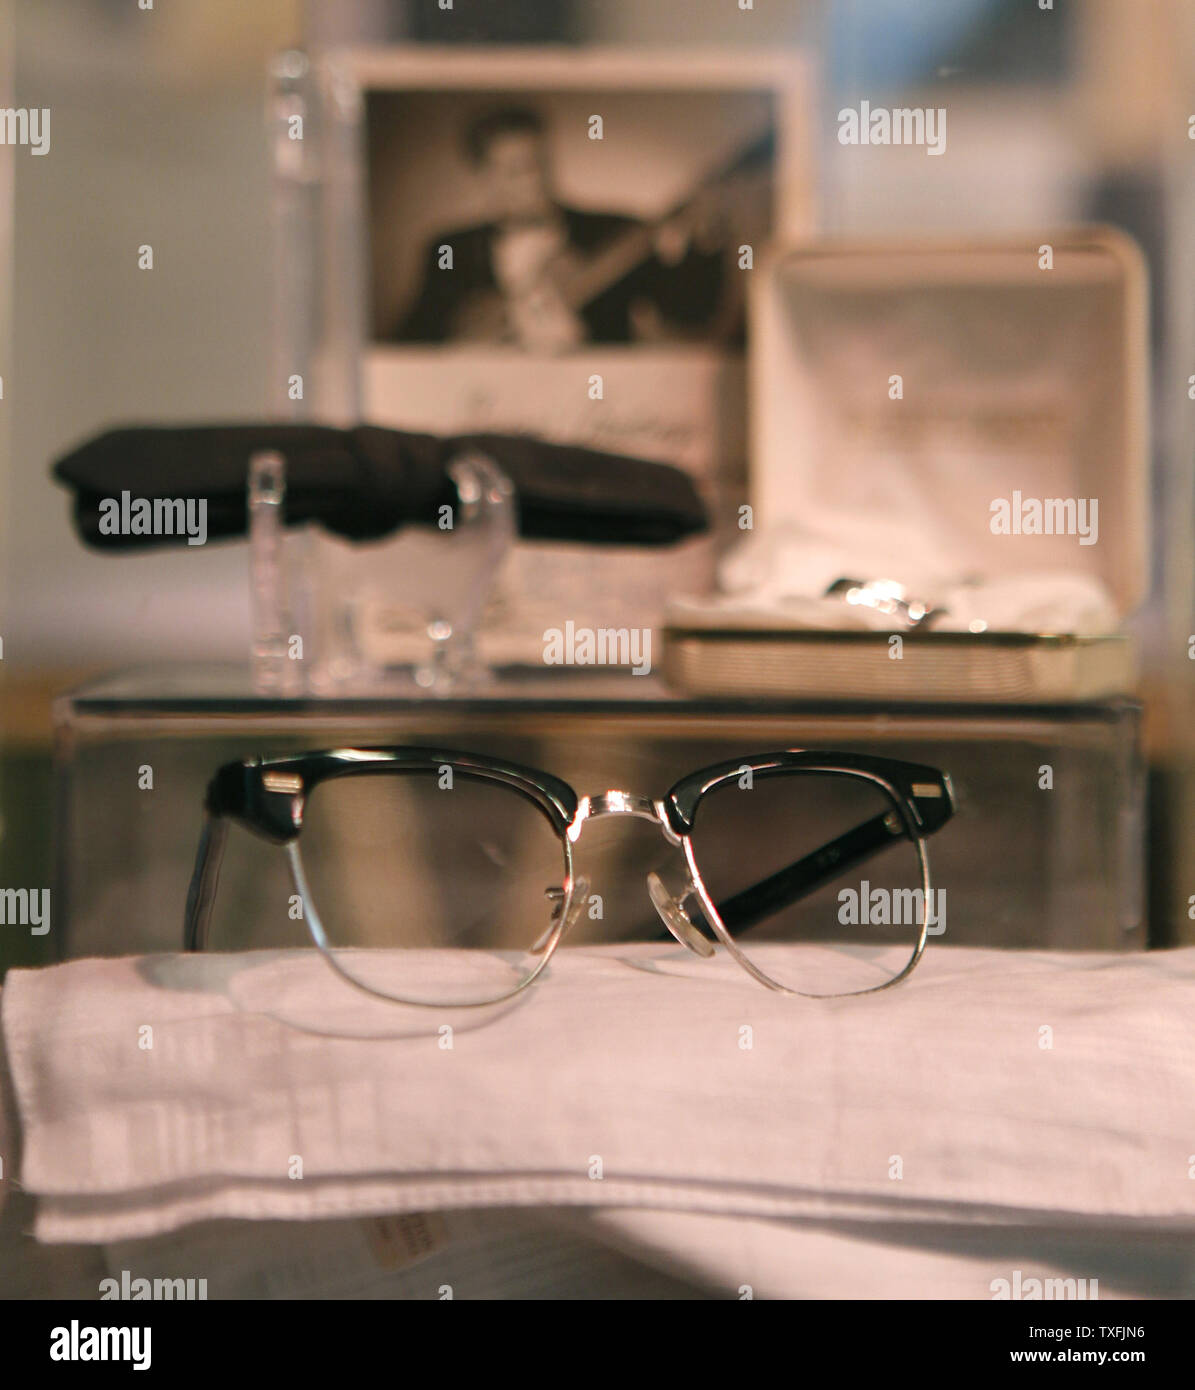 Eyeglasses belonging to Buddy Holly along with a bow tie and cufflinks belonging to Ritchie Valens are displayed before a tribute concert memorializing Holly, Valens, and J.P. 'The Big Bopper' Richardson at the Surf Ballroom in Clear Lake, Iowa on February 2, 2009. The three rock 'n' roll pioneers played their last show at the Surf Ballroom 50 years ago to the day. Singer Don McLean coined the phrase 'the day the music died' in his hit song 'American Pie' referring to the death of the plane crash that killed the three stars in the early morning hours of February 3, 1959.  (UPI Photo/Brian Kers Stock Photo